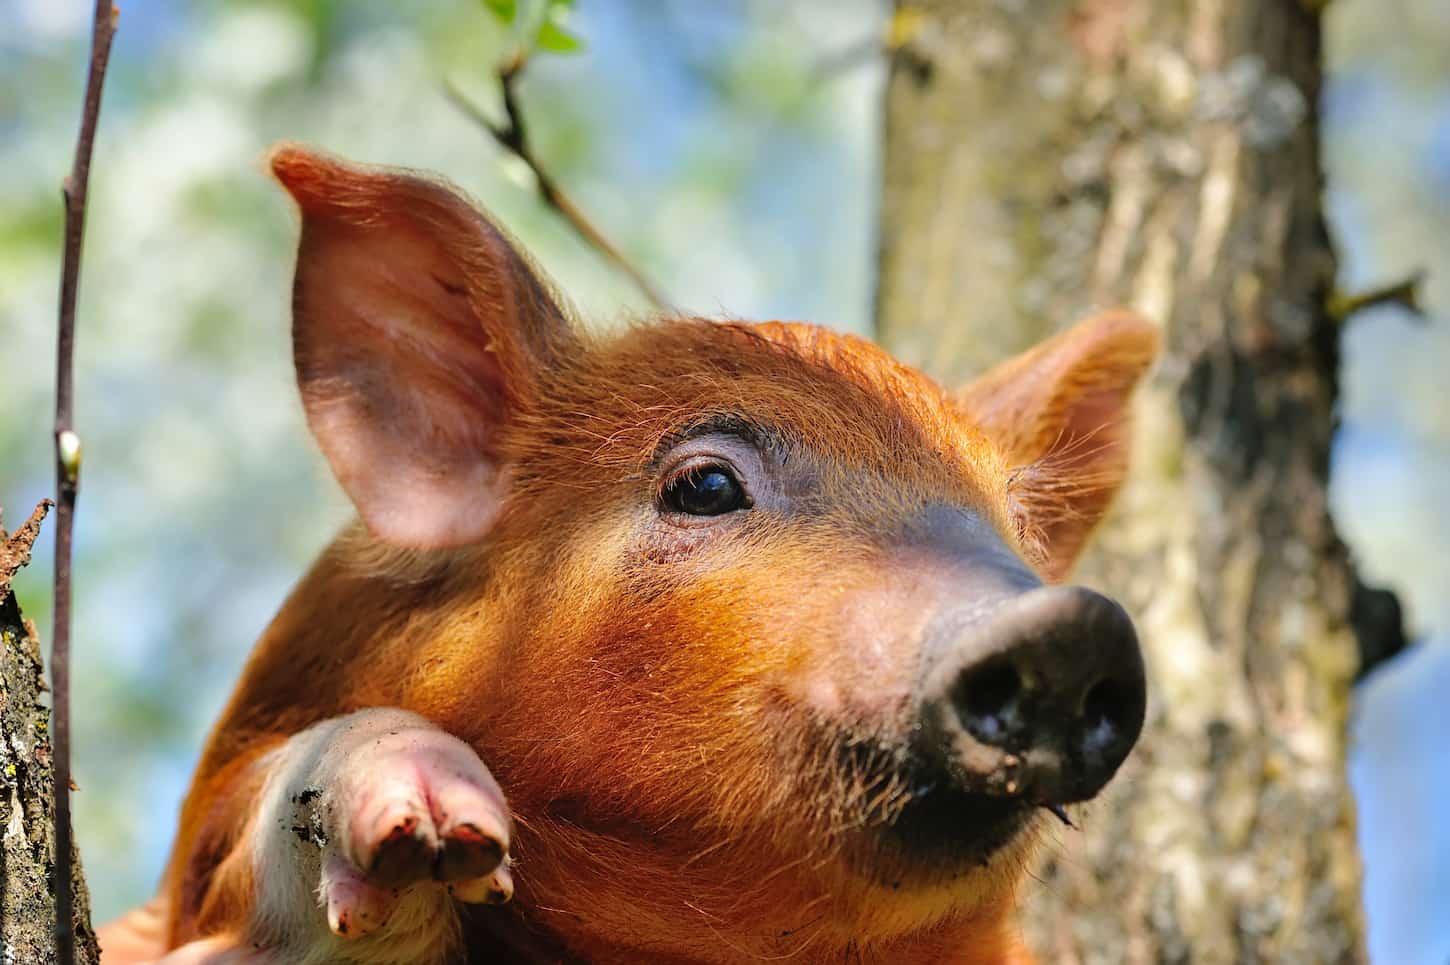 An image of a young red pig on outdoors looking at the camera.